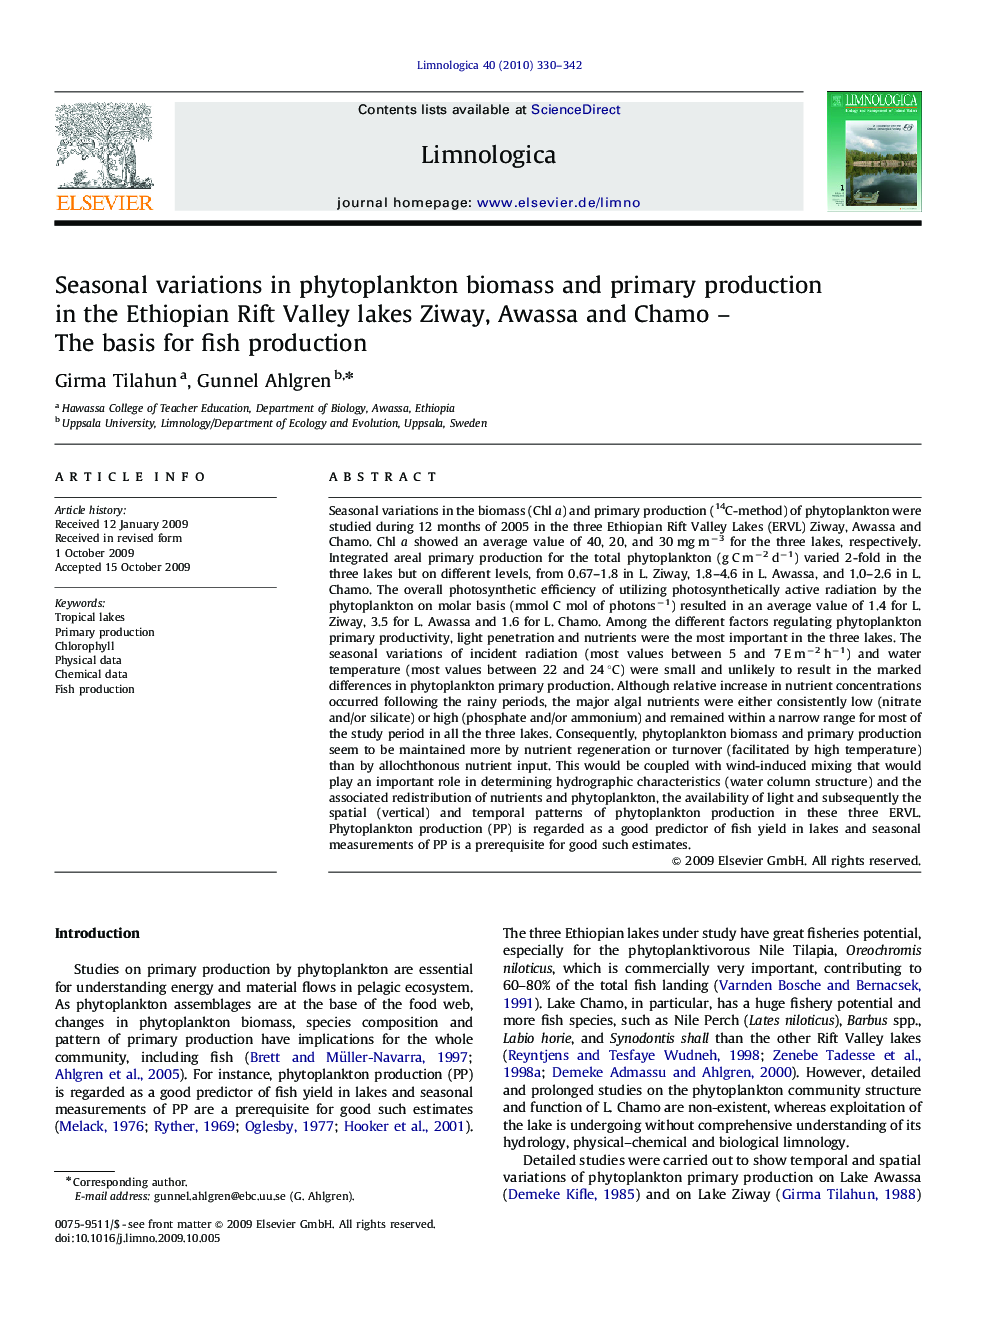 Seasonal variations in phytoplankton biomass and primary production in the Ethiopian Rift Valley lakes Ziway, Awassa and Chamo – The basis for fish production